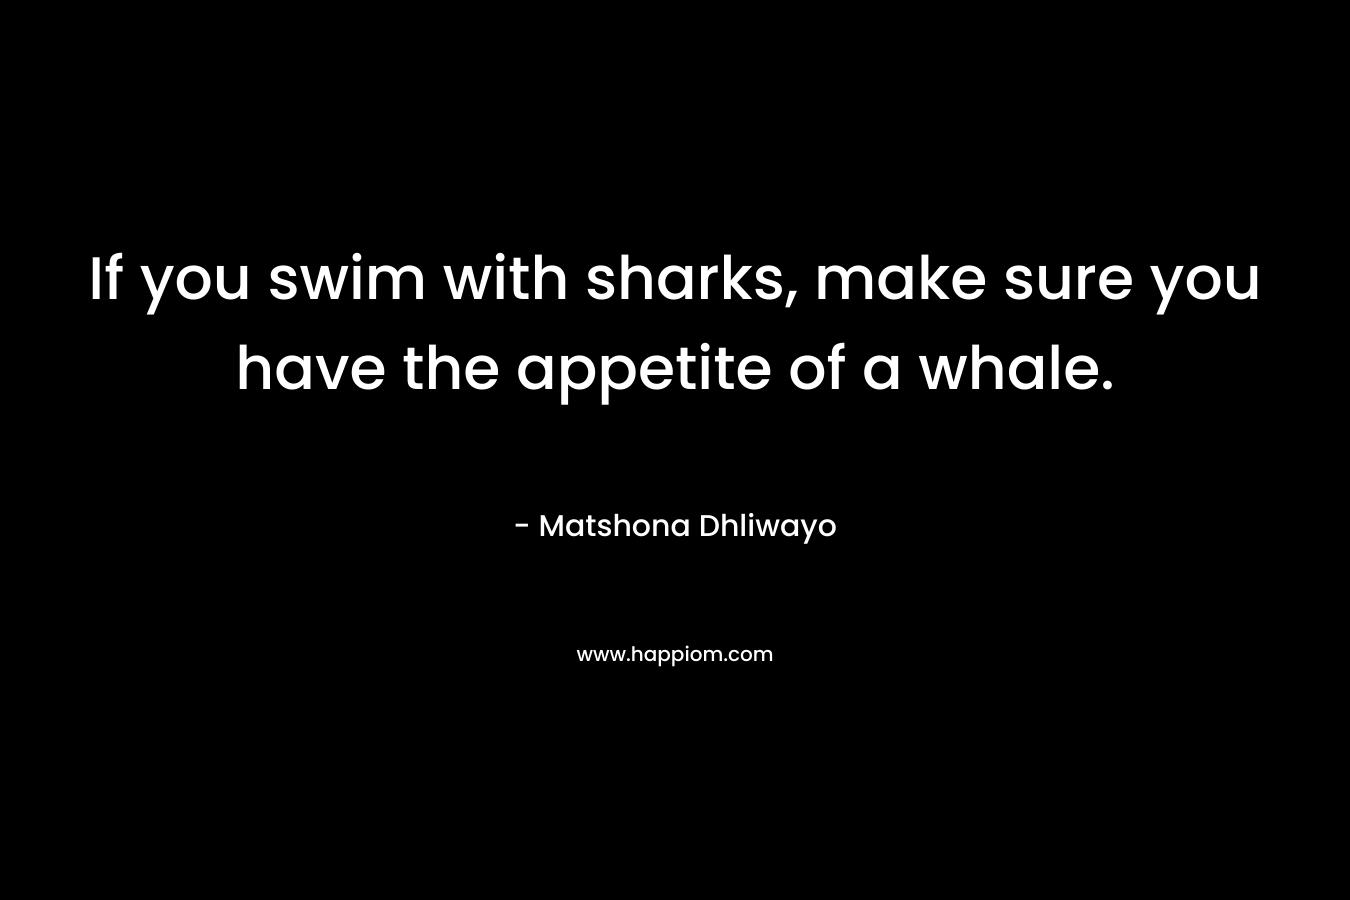 If you swim with sharks, make sure you have the appetite of a whale. – Matshona Dhliwayo